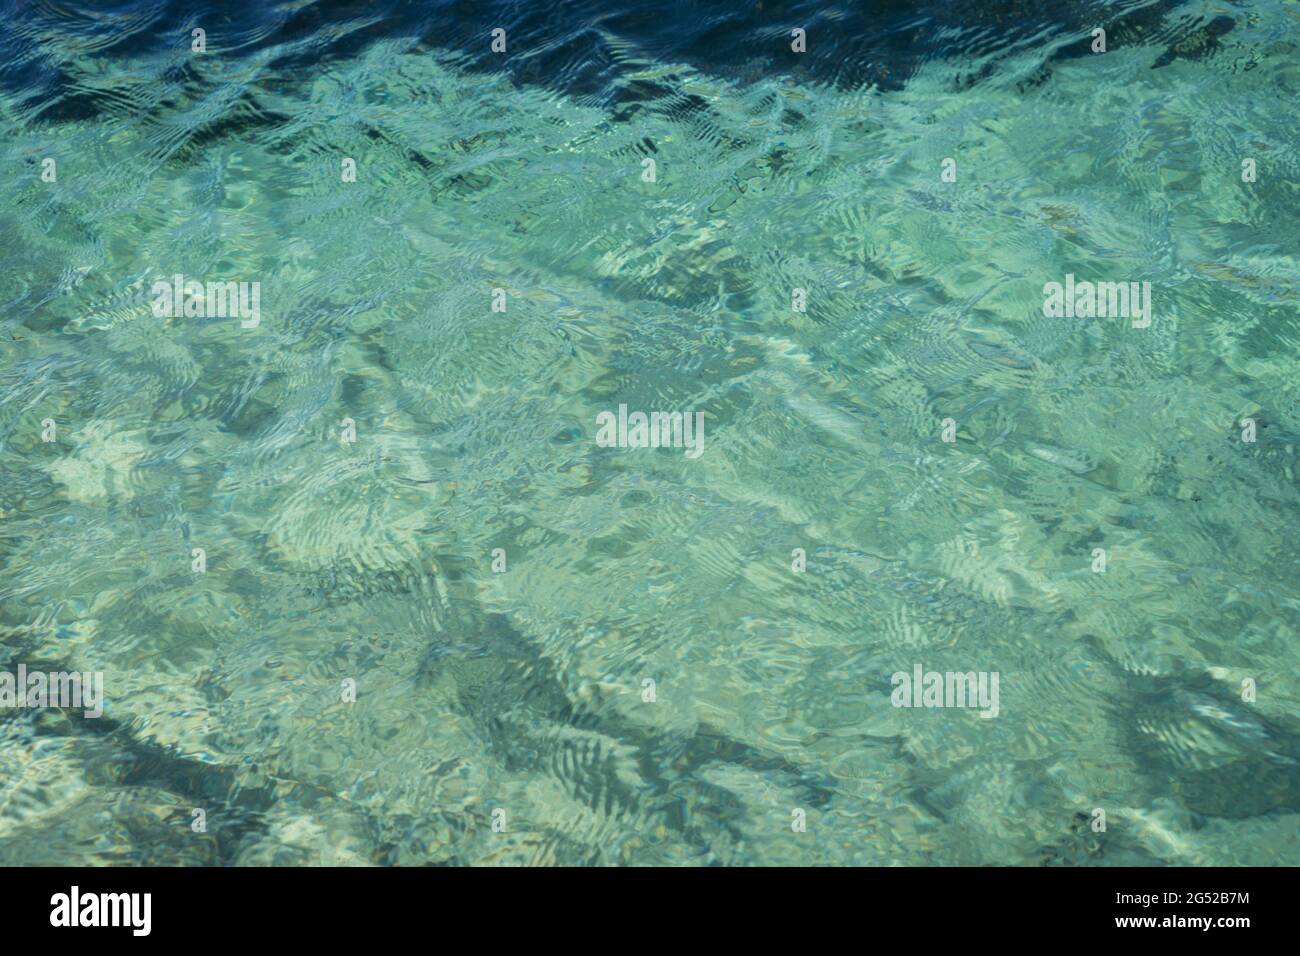 turquoise blue water surface abstract background Stock Photo